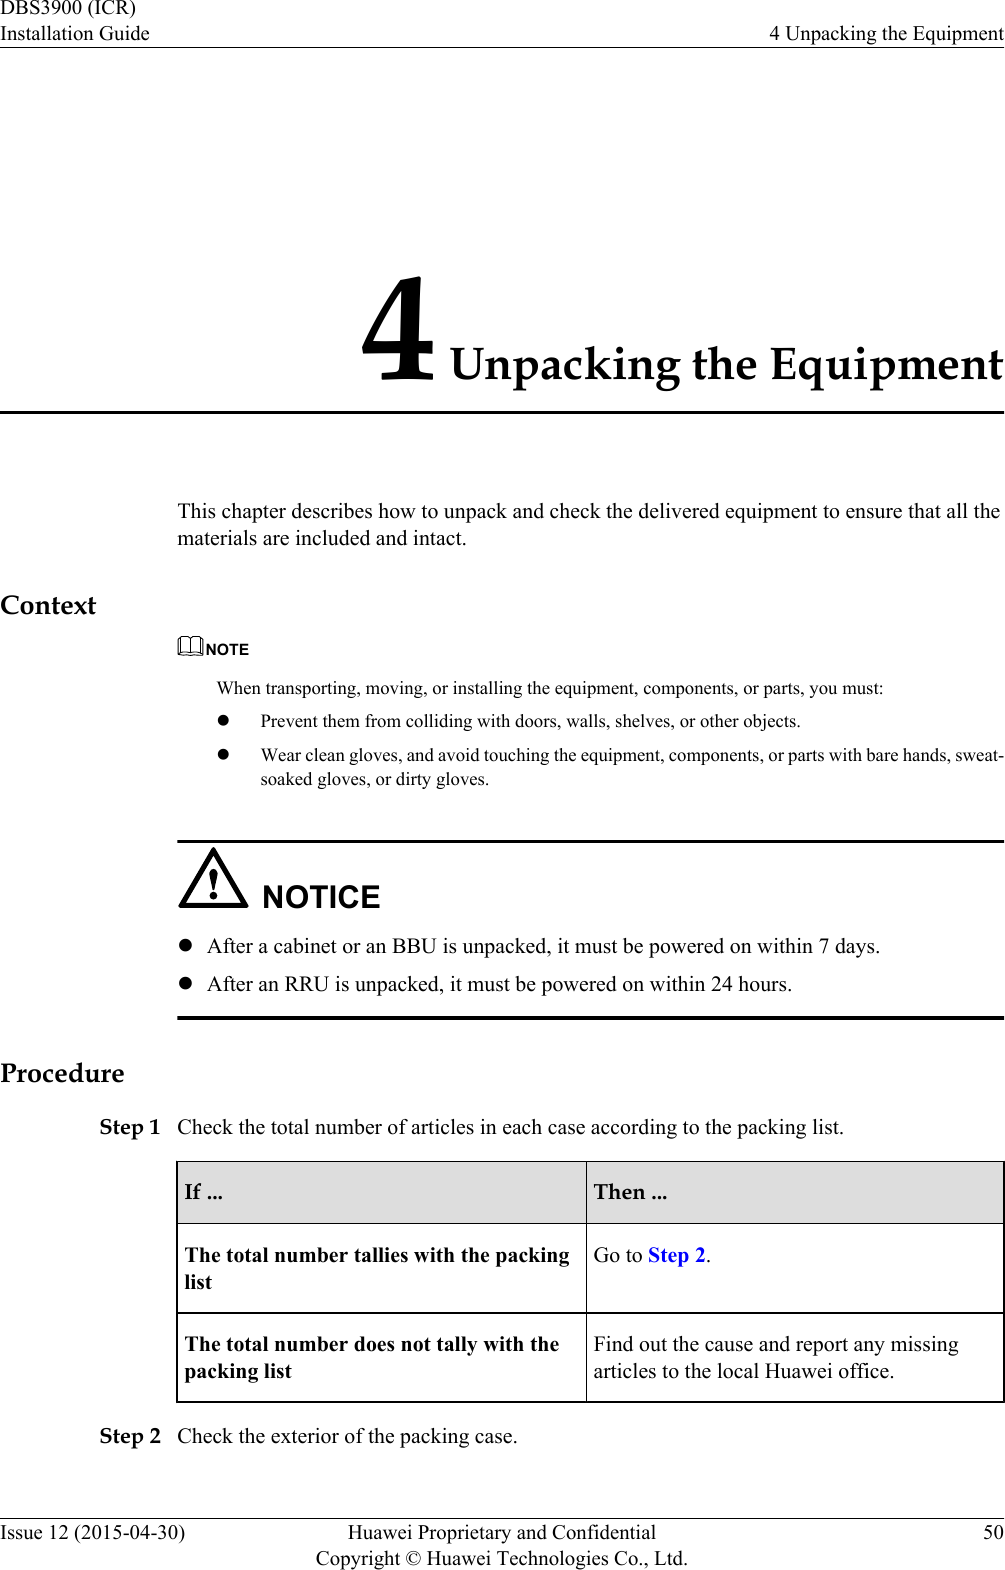 4 Unpacking the EquipmentThis chapter describes how to unpack and check the delivered equipment to ensure that all thematerials are included and intact.ContextNOTEWhen transporting, moving, or installing the equipment, components, or parts, you must:lPrevent them from colliding with doors, walls, shelves, or other objects.lWear clean gloves, and avoid touching the equipment, components, or parts with bare hands, sweat-soaked gloves, or dirty gloves.NOTICElAfter a cabinet or an BBU is unpacked, it must be powered on within 7 days.lAfter an RRU is unpacked, it must be powered on within 24 hours.ProcedureStep 1 Check the total number of articles in each case according to the packing list.If ... Then ...The total number tallies with the packinglistGo to Step 2.The total number does not tally with thepacking listFind out the cause and report any missingarticles to the local Huawei office.Step 2 Check the exterior of the packing case.DBS3900 (ICR)Installation Guide 4 Unpacking the EquipmentIssue 12 (2015-04-30) Huawei Proprietary and ConfidentialCopyright © Huawei Technologies Co., Ltd.50